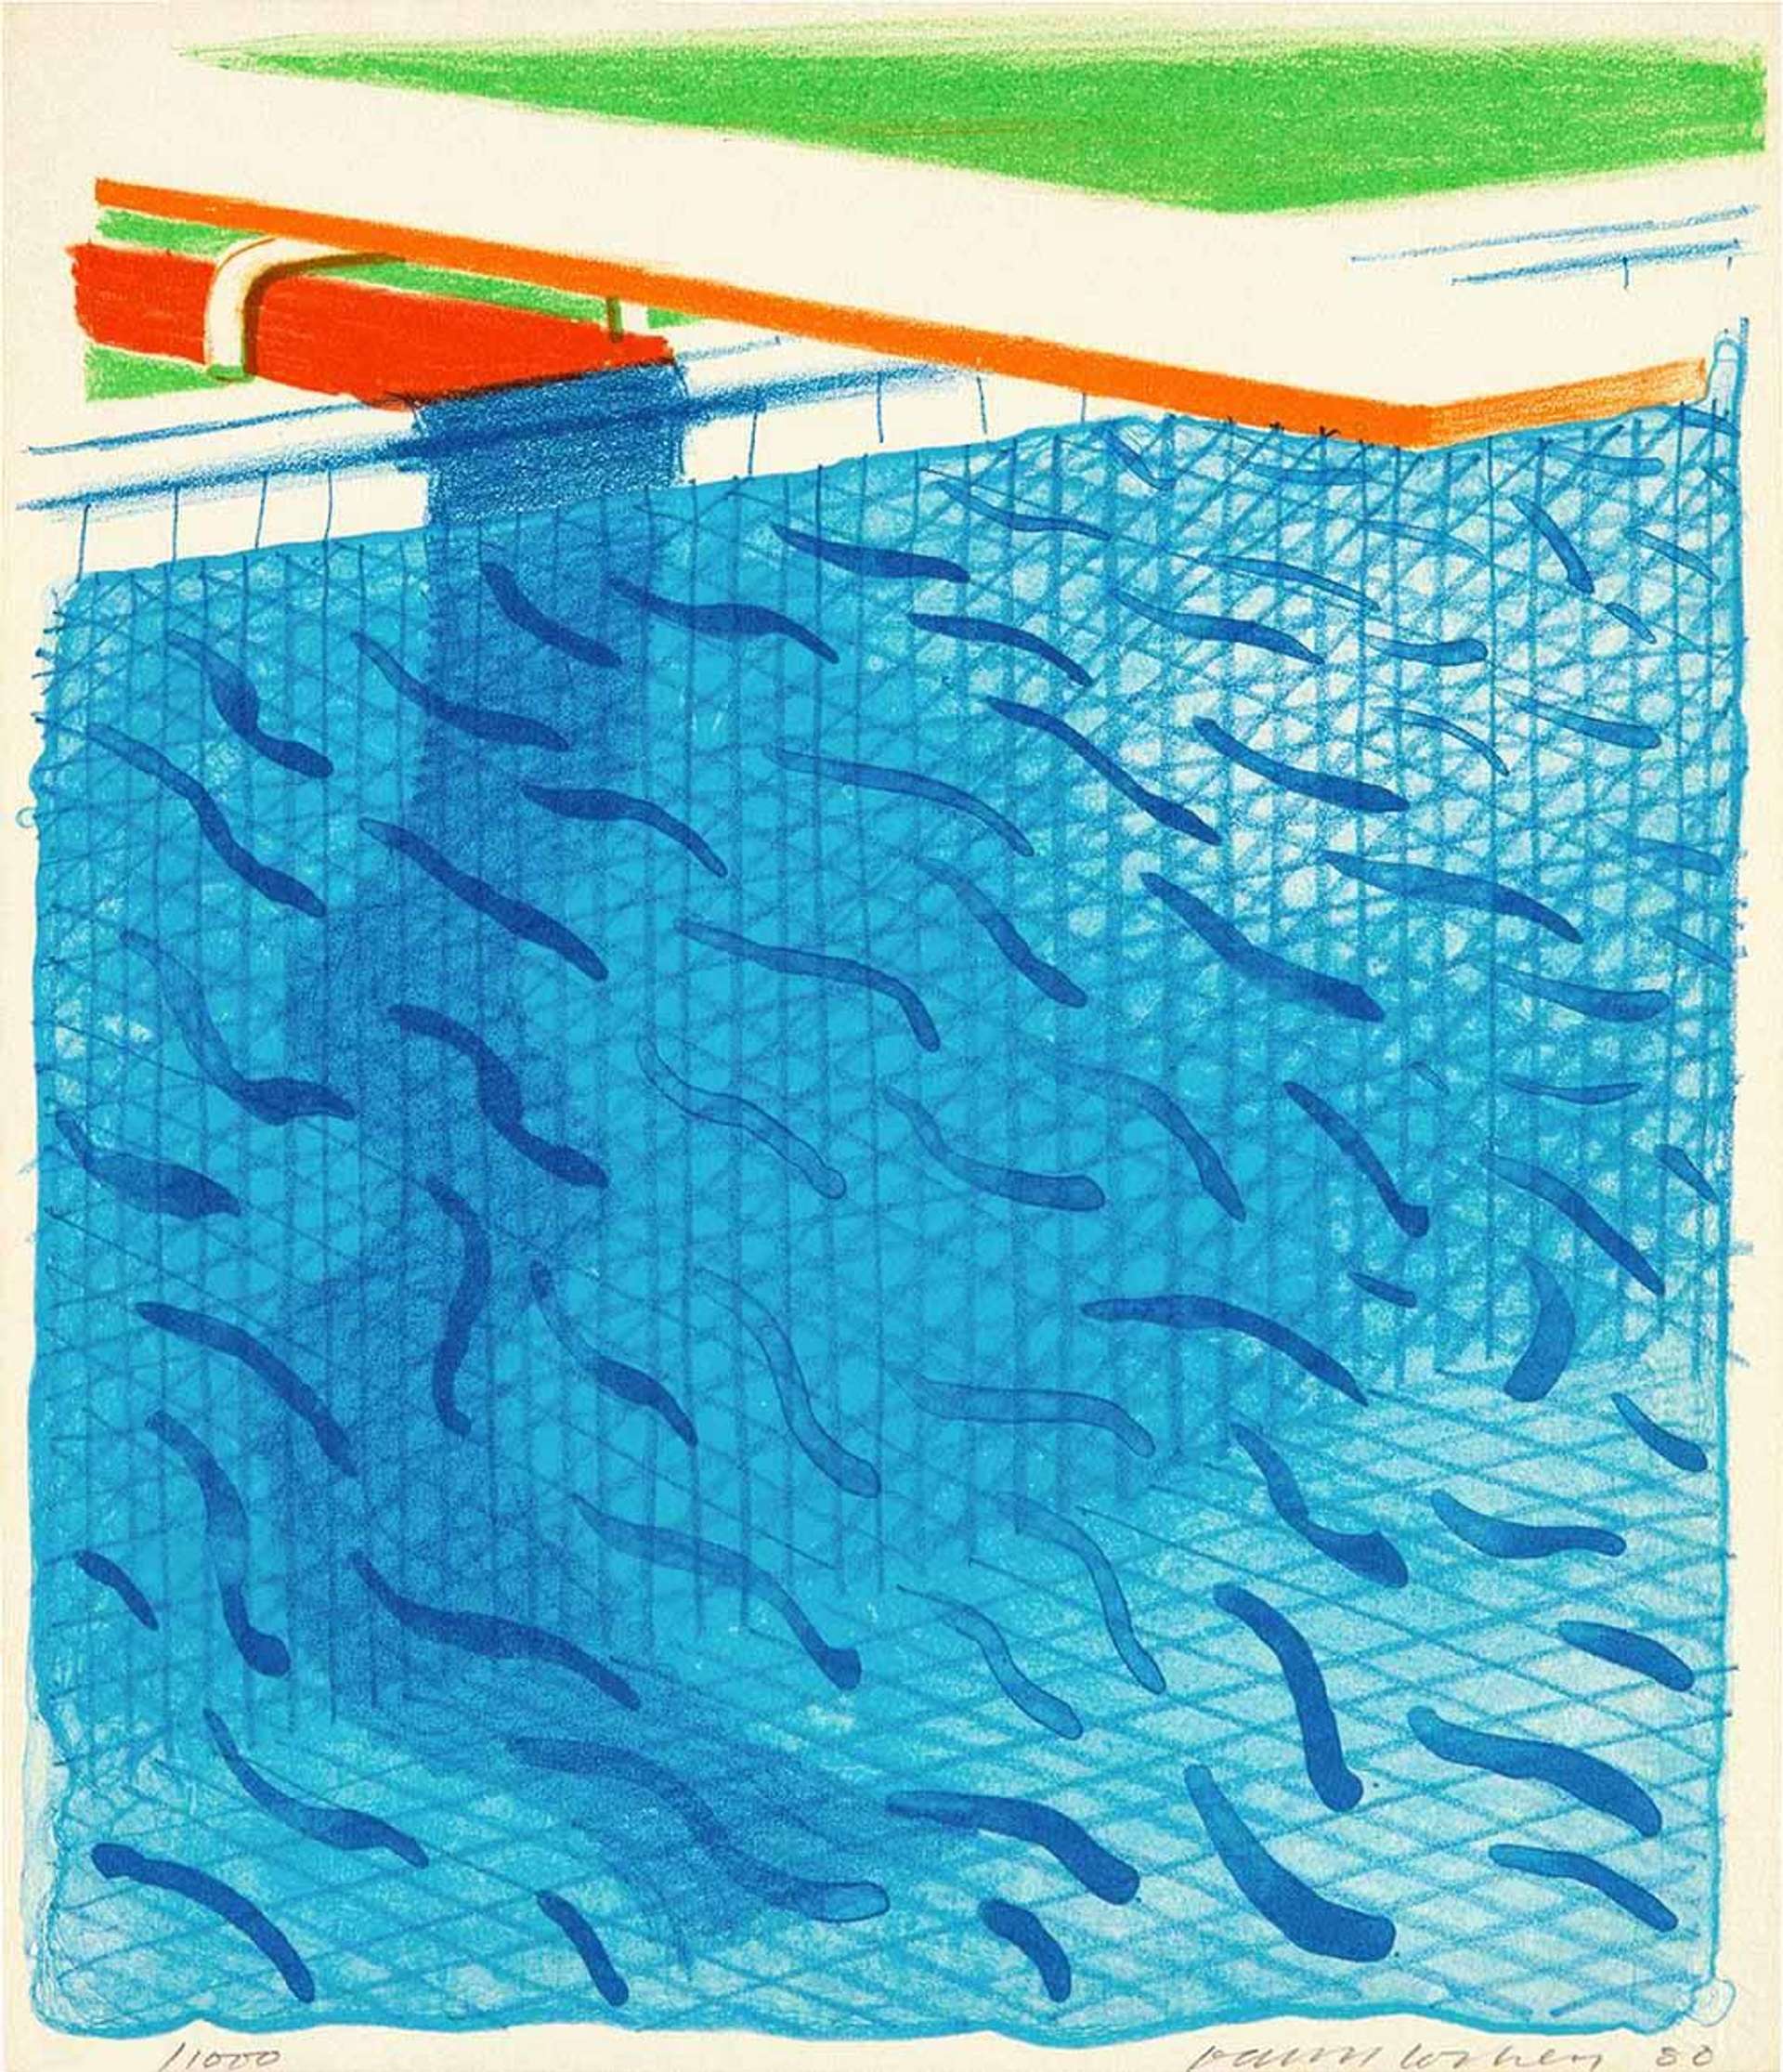 10 Facts About David Hockney's Swimming Pools